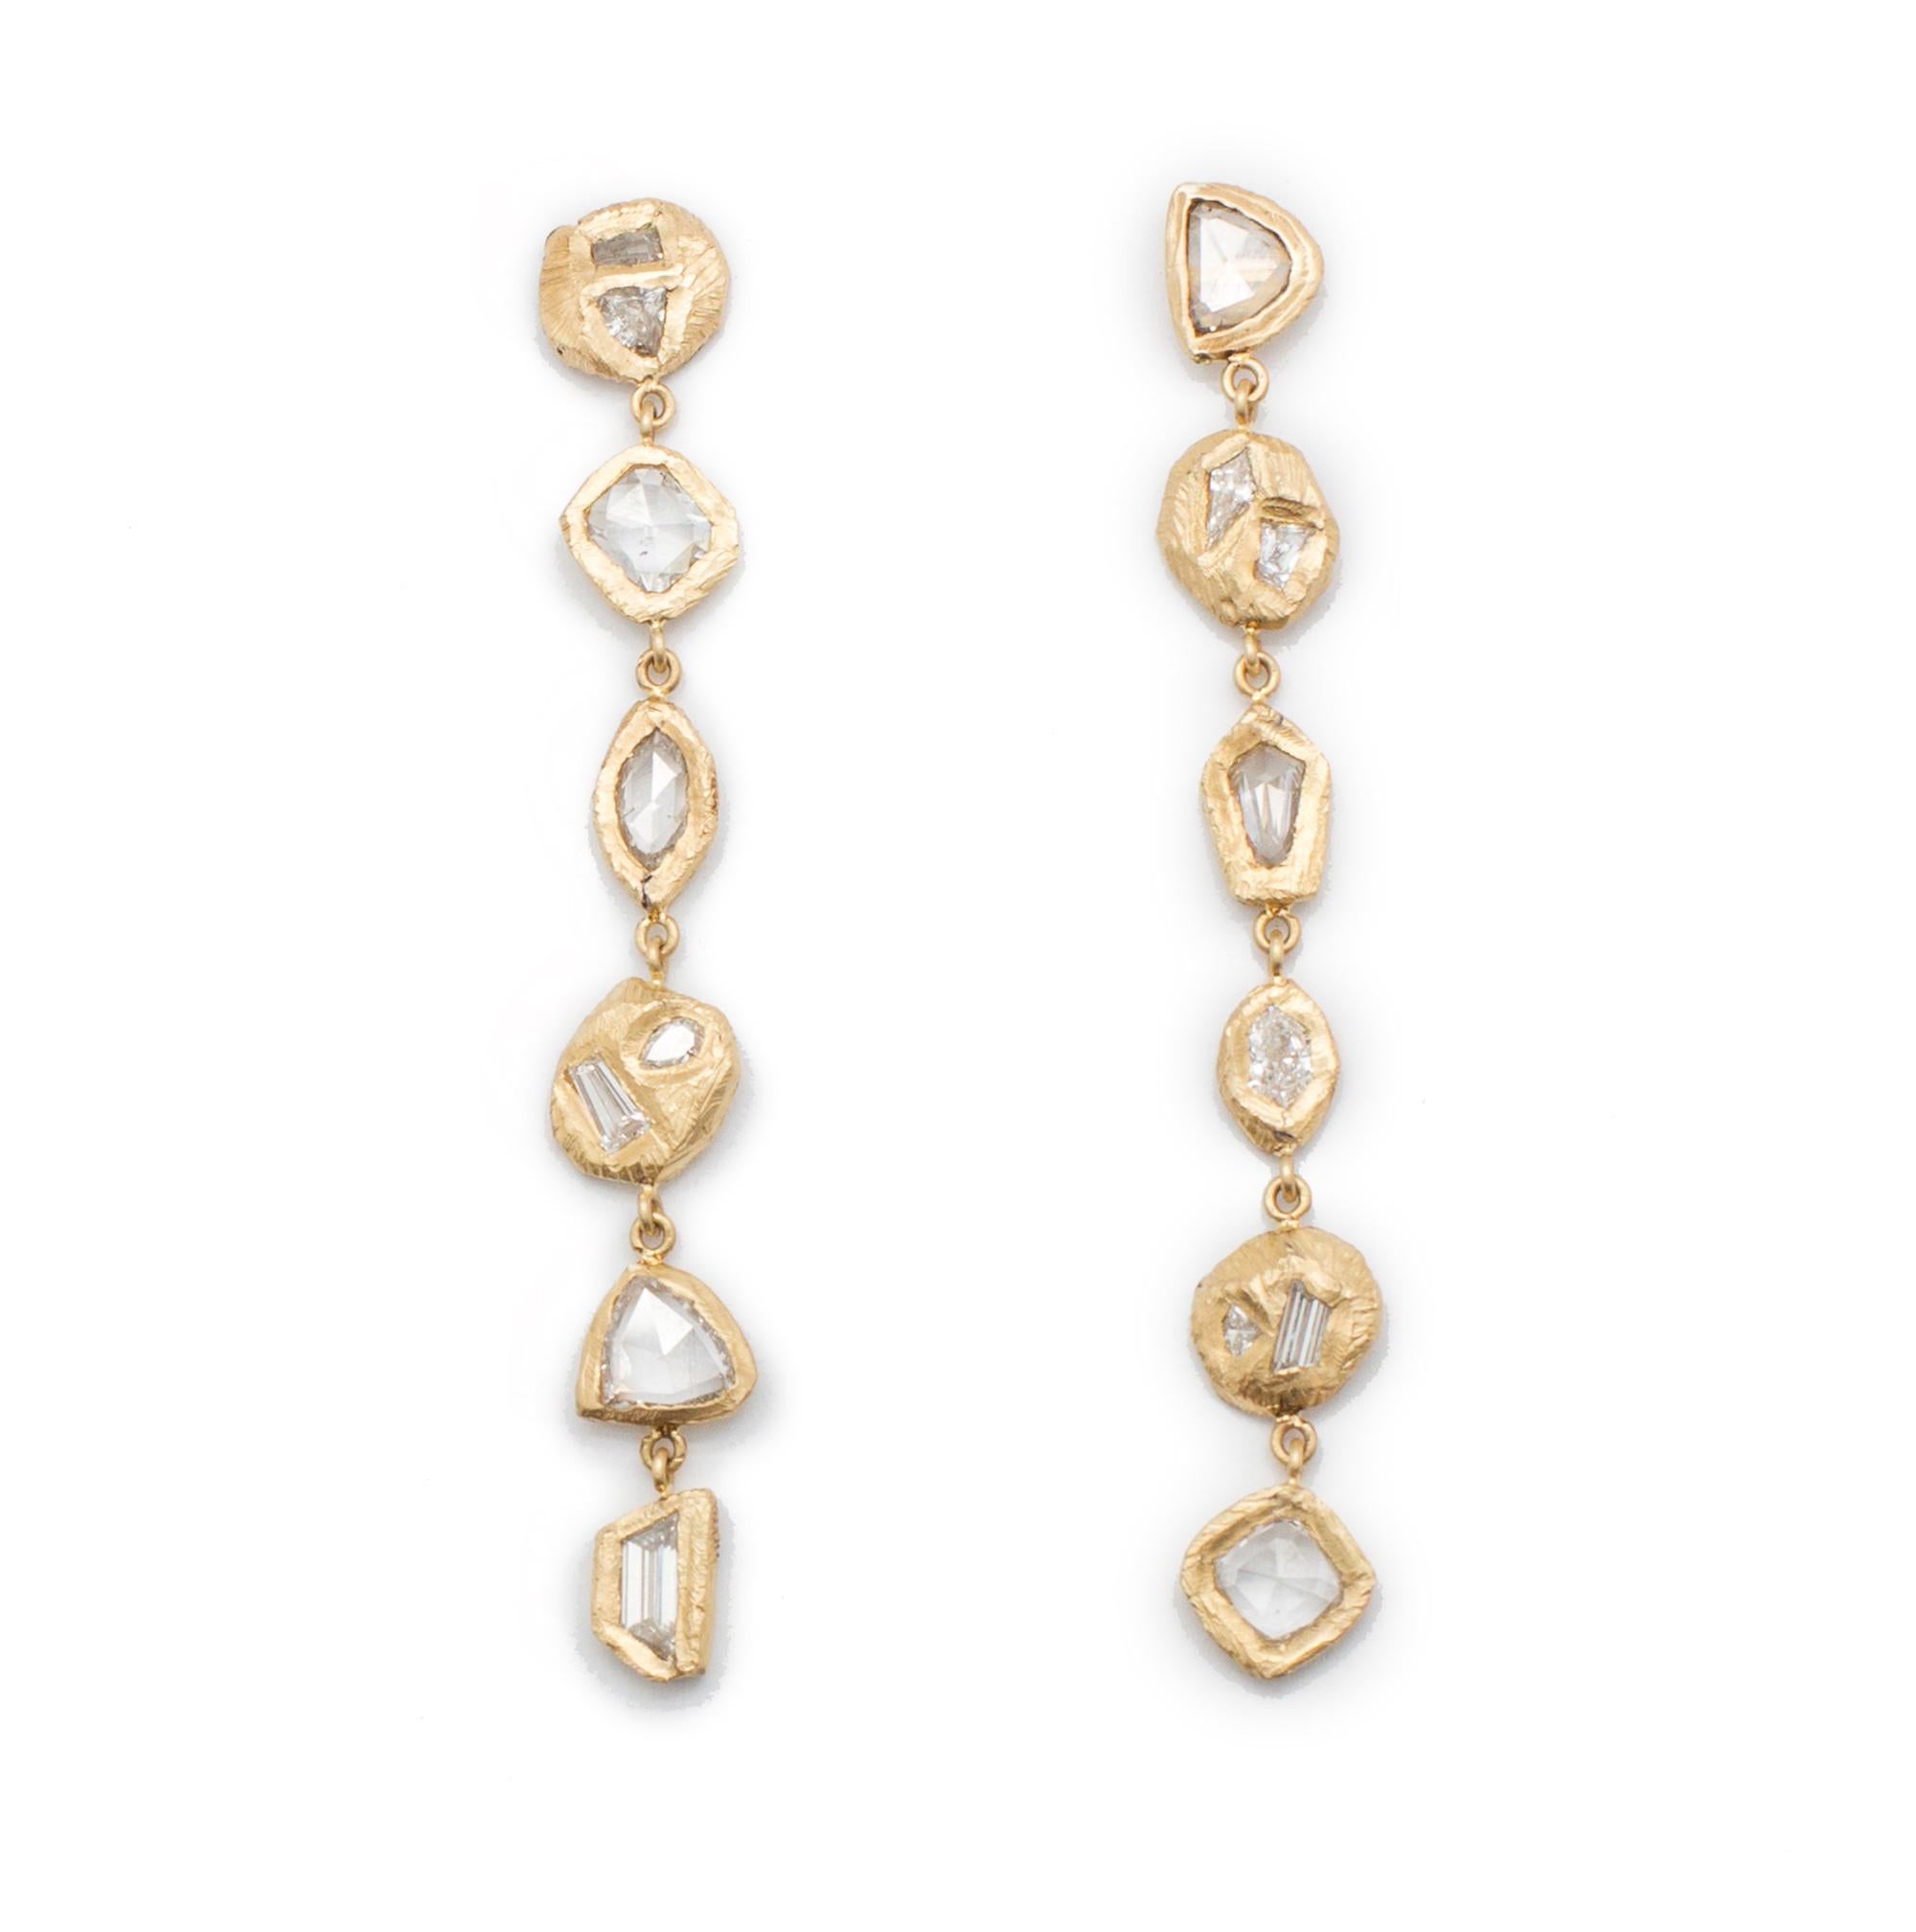 18kt yellow gold earrings with six hand carved settings on either side with 3.16 carats of diamonds. 
Handcarved in NYC by artist Page Sargisson. These earrings are truly one of a kind.